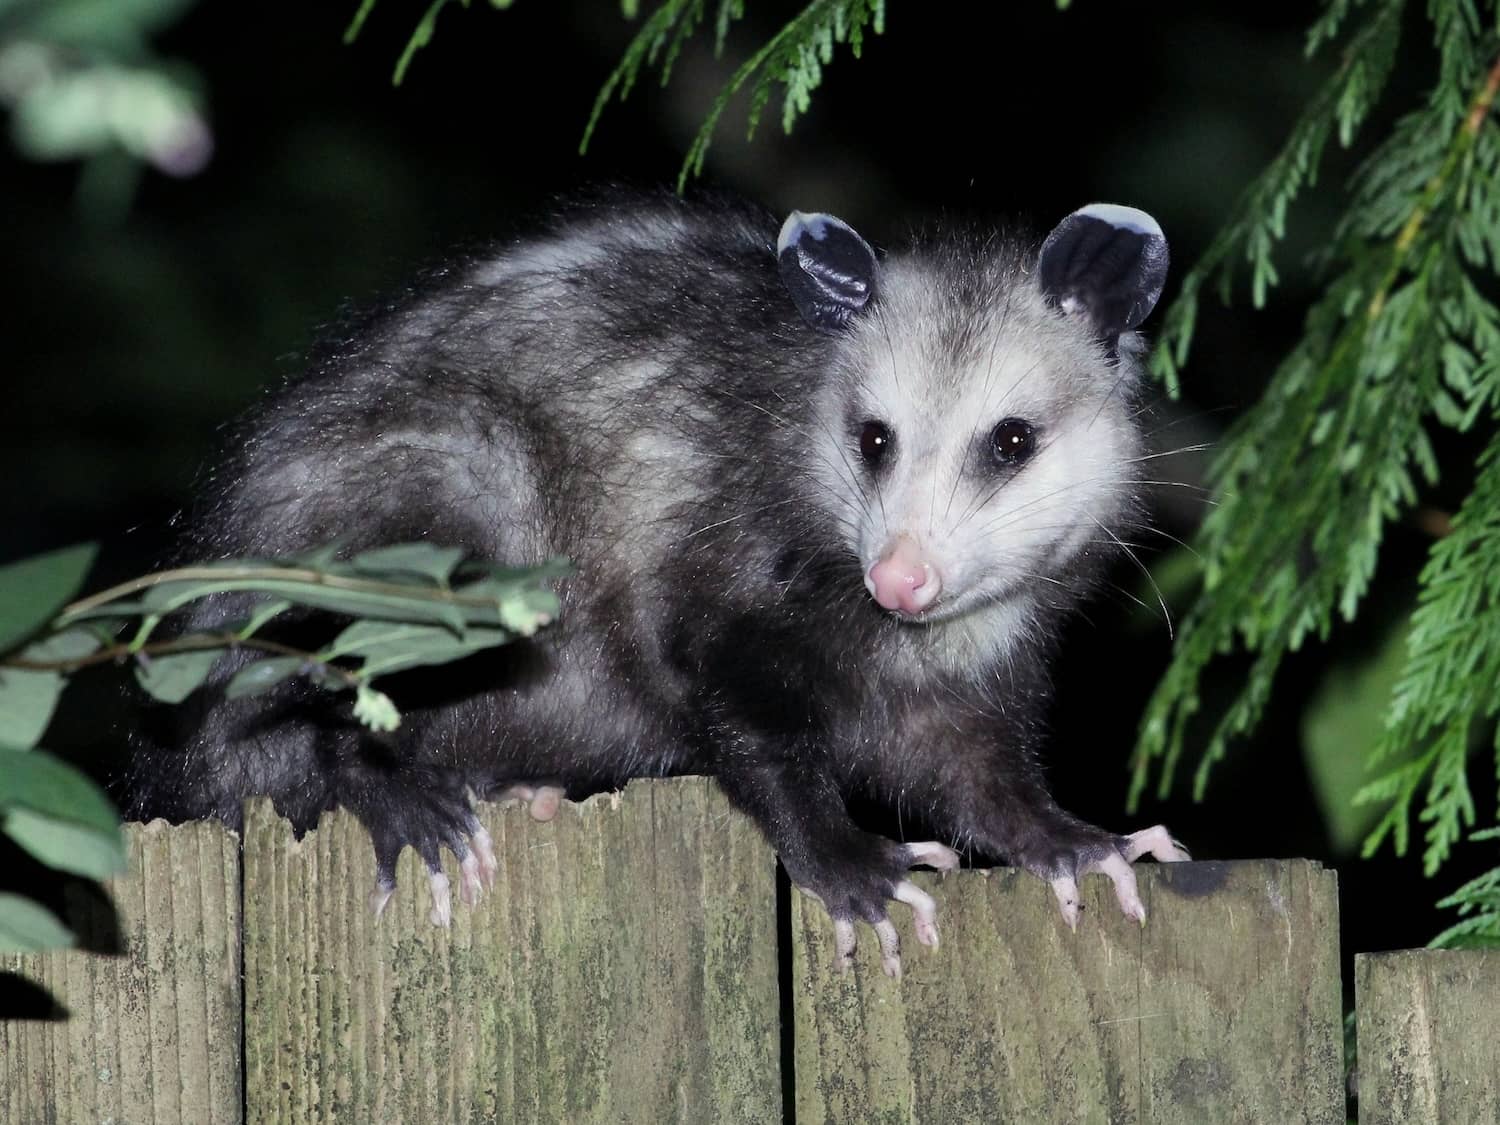 Opossums are not blind but do have specialized vision